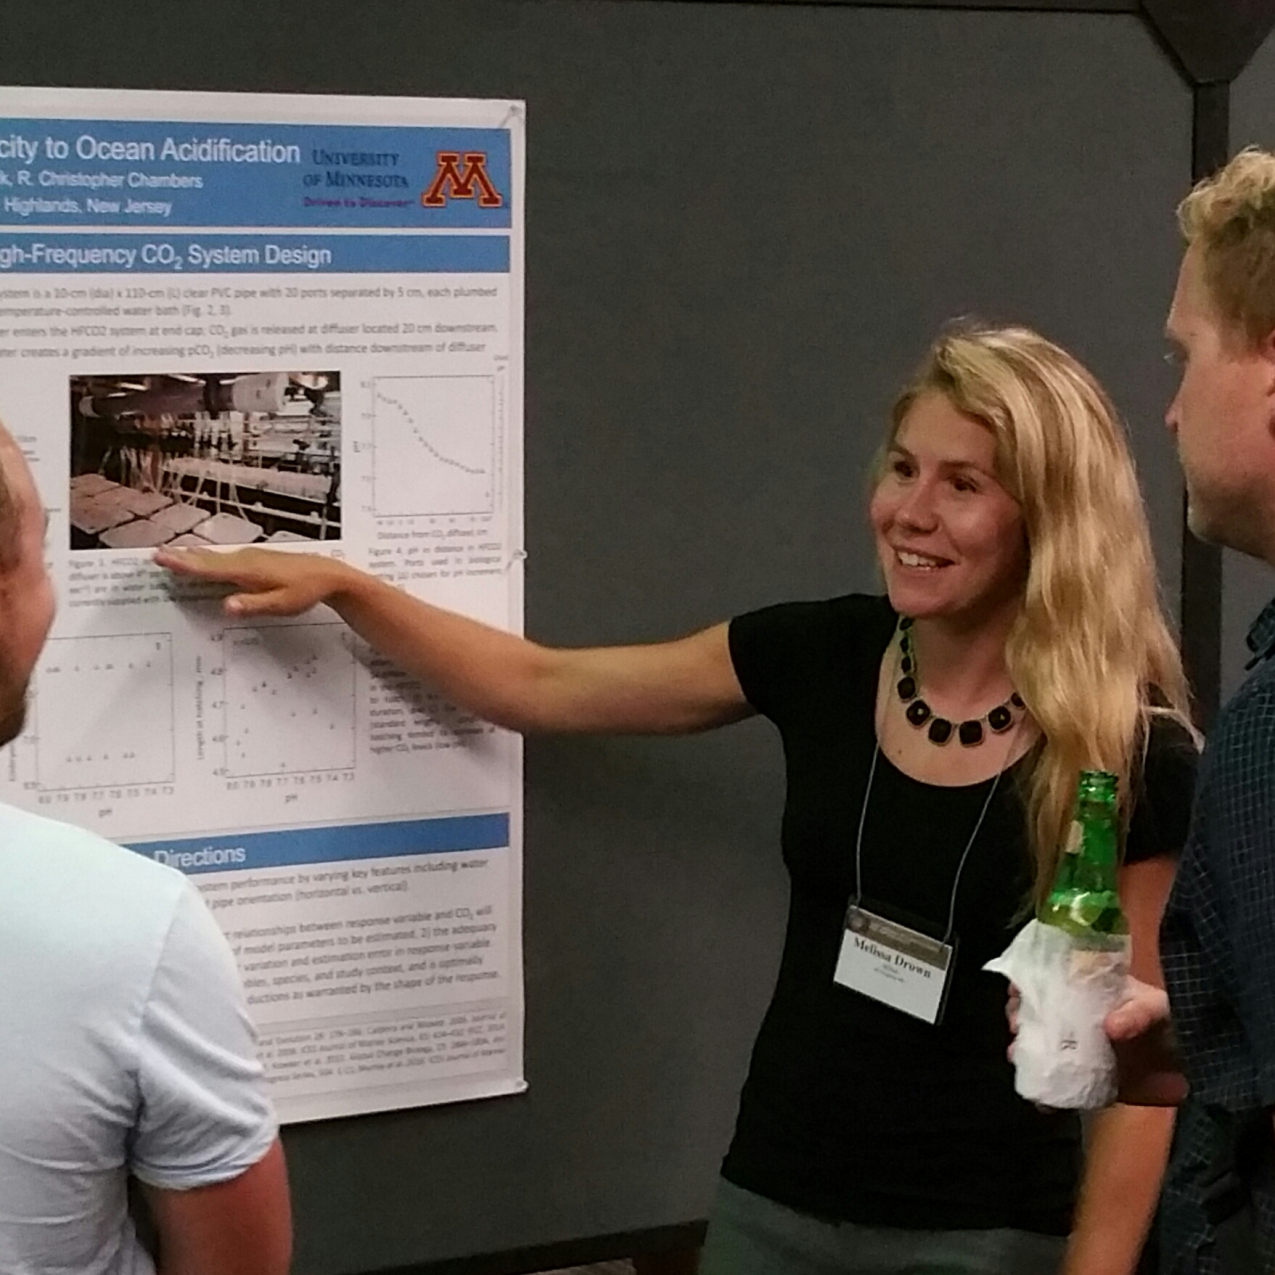 Hollings Scholar Melissa Drown presenting a poster on the high-frequency CO2 system design at the Larval Fish Conference in Austin, TX.